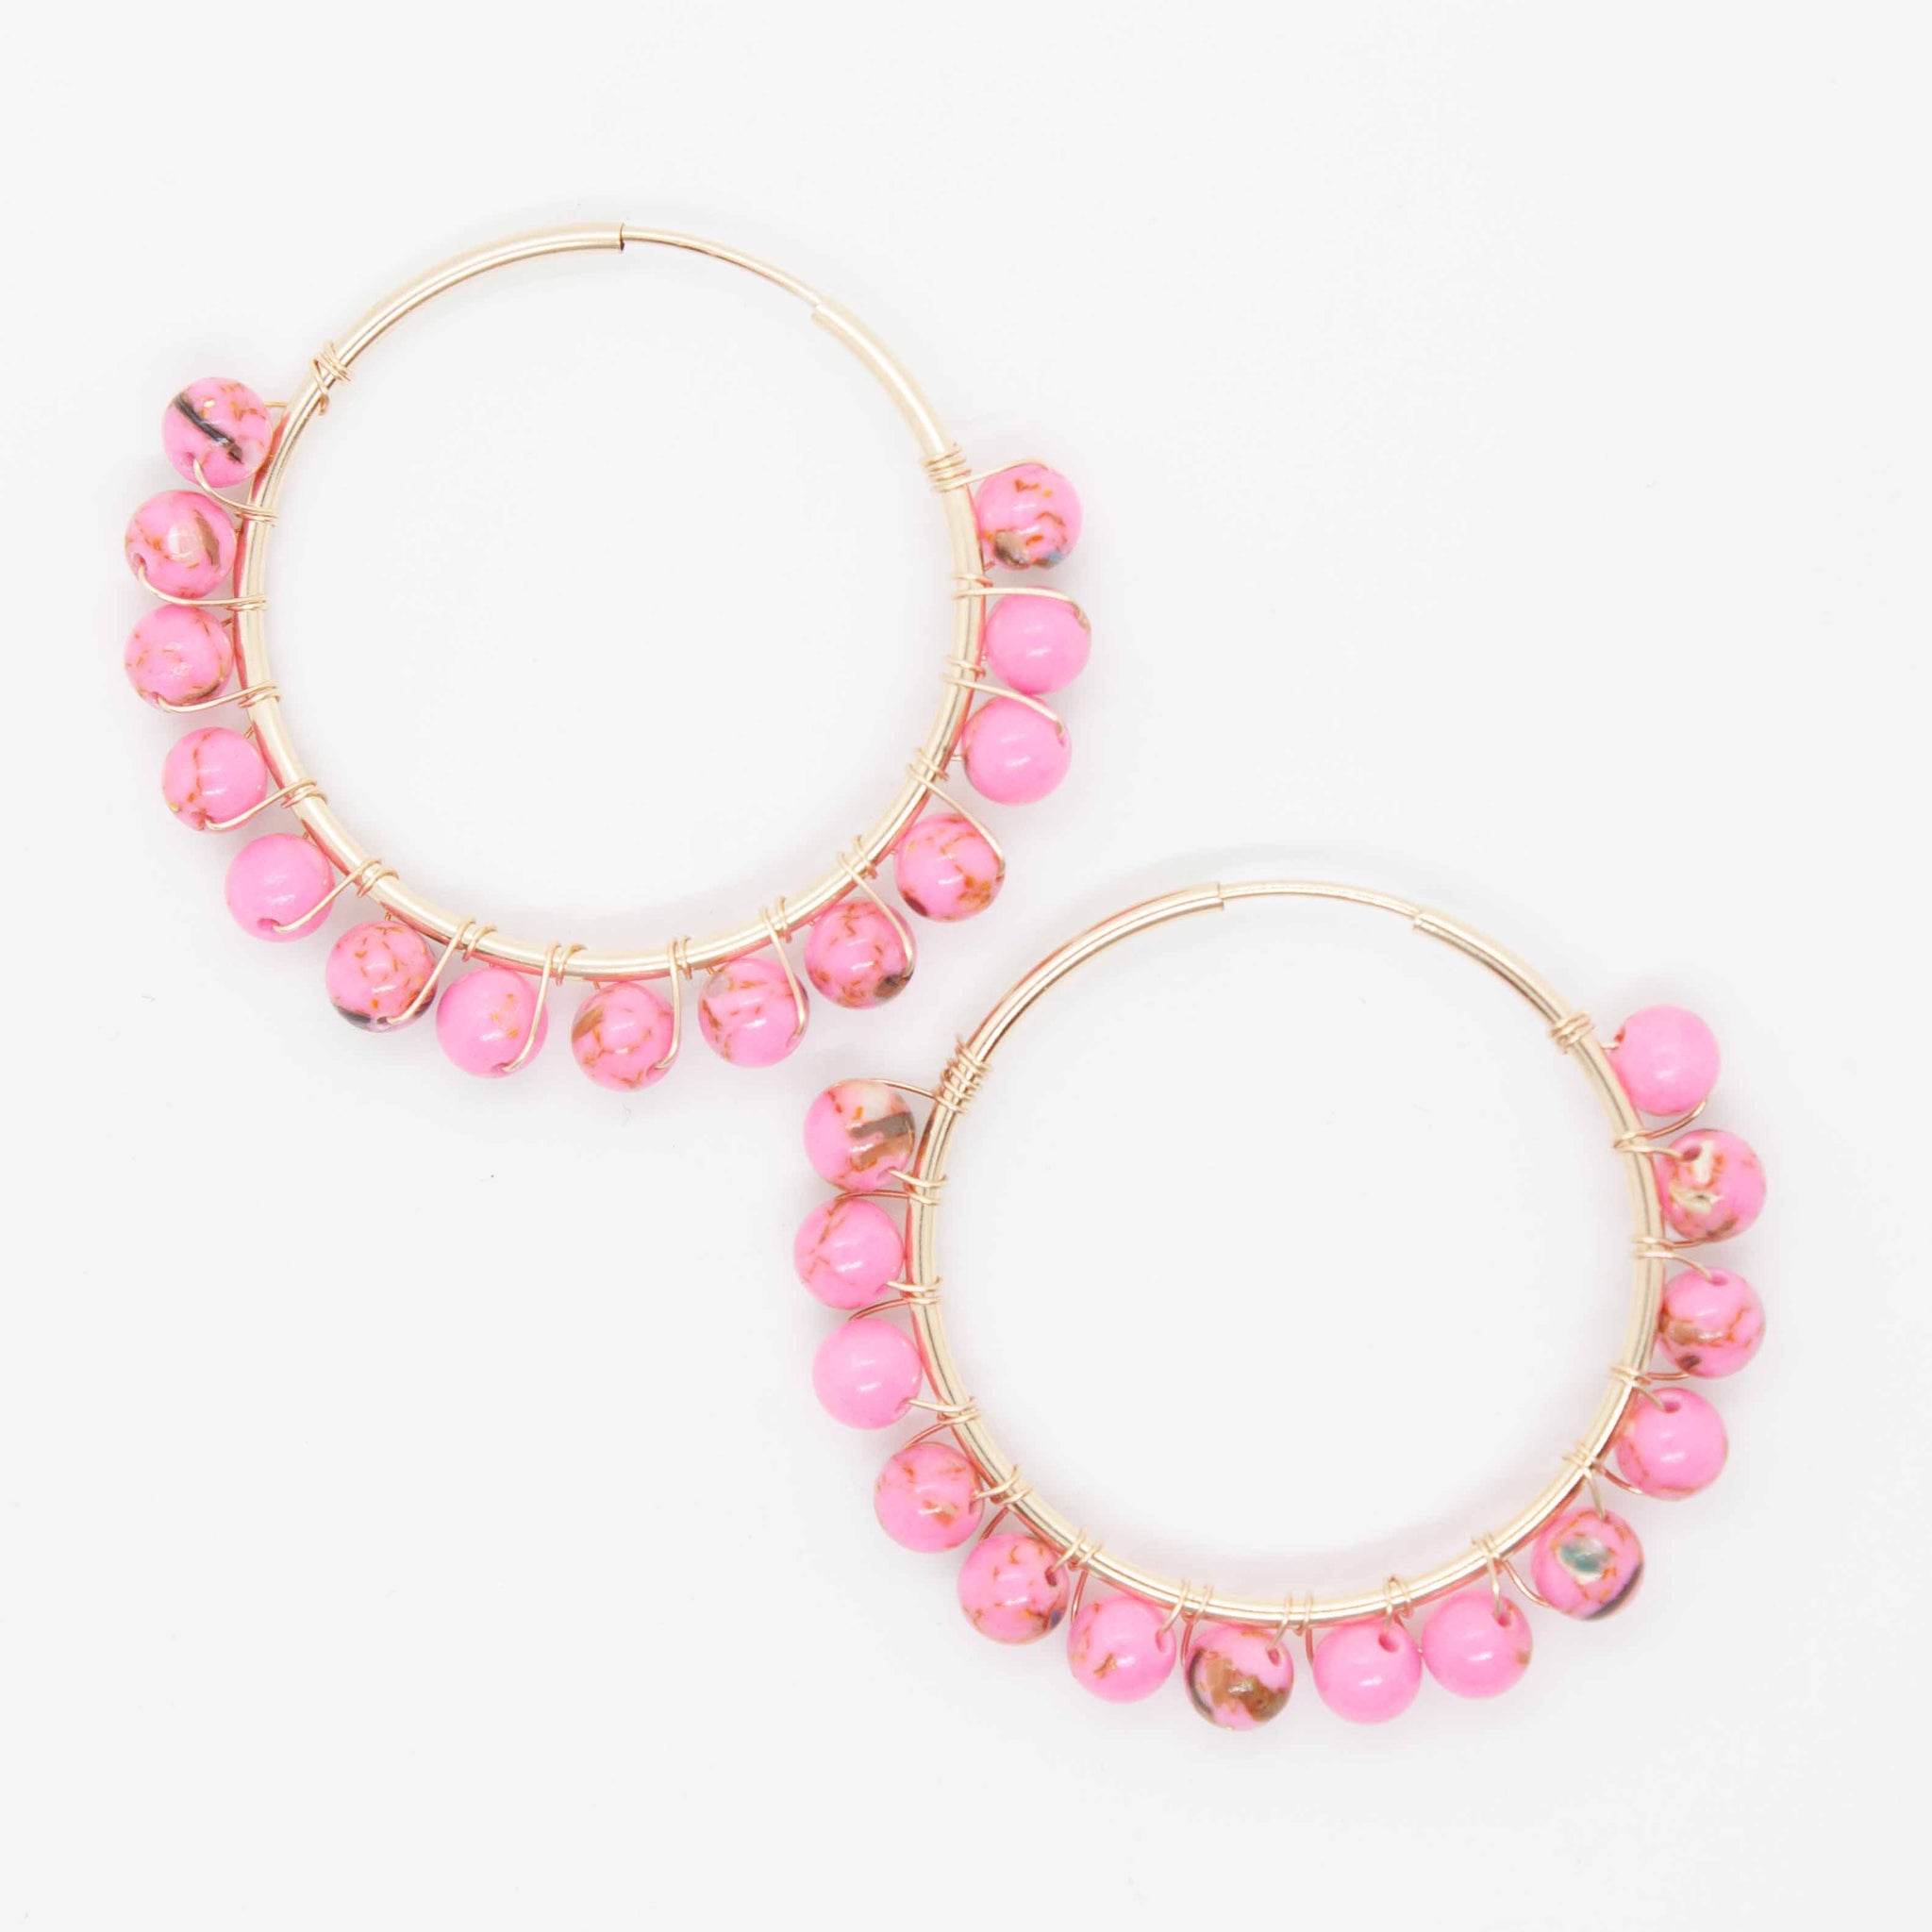 Cute and bubbly hoops to adorn your sweet lobes this summer!  30mm gold filled hoop earrings and pink beads wrapped with gold wire. Handmade in Toronto by kp jewelry co.